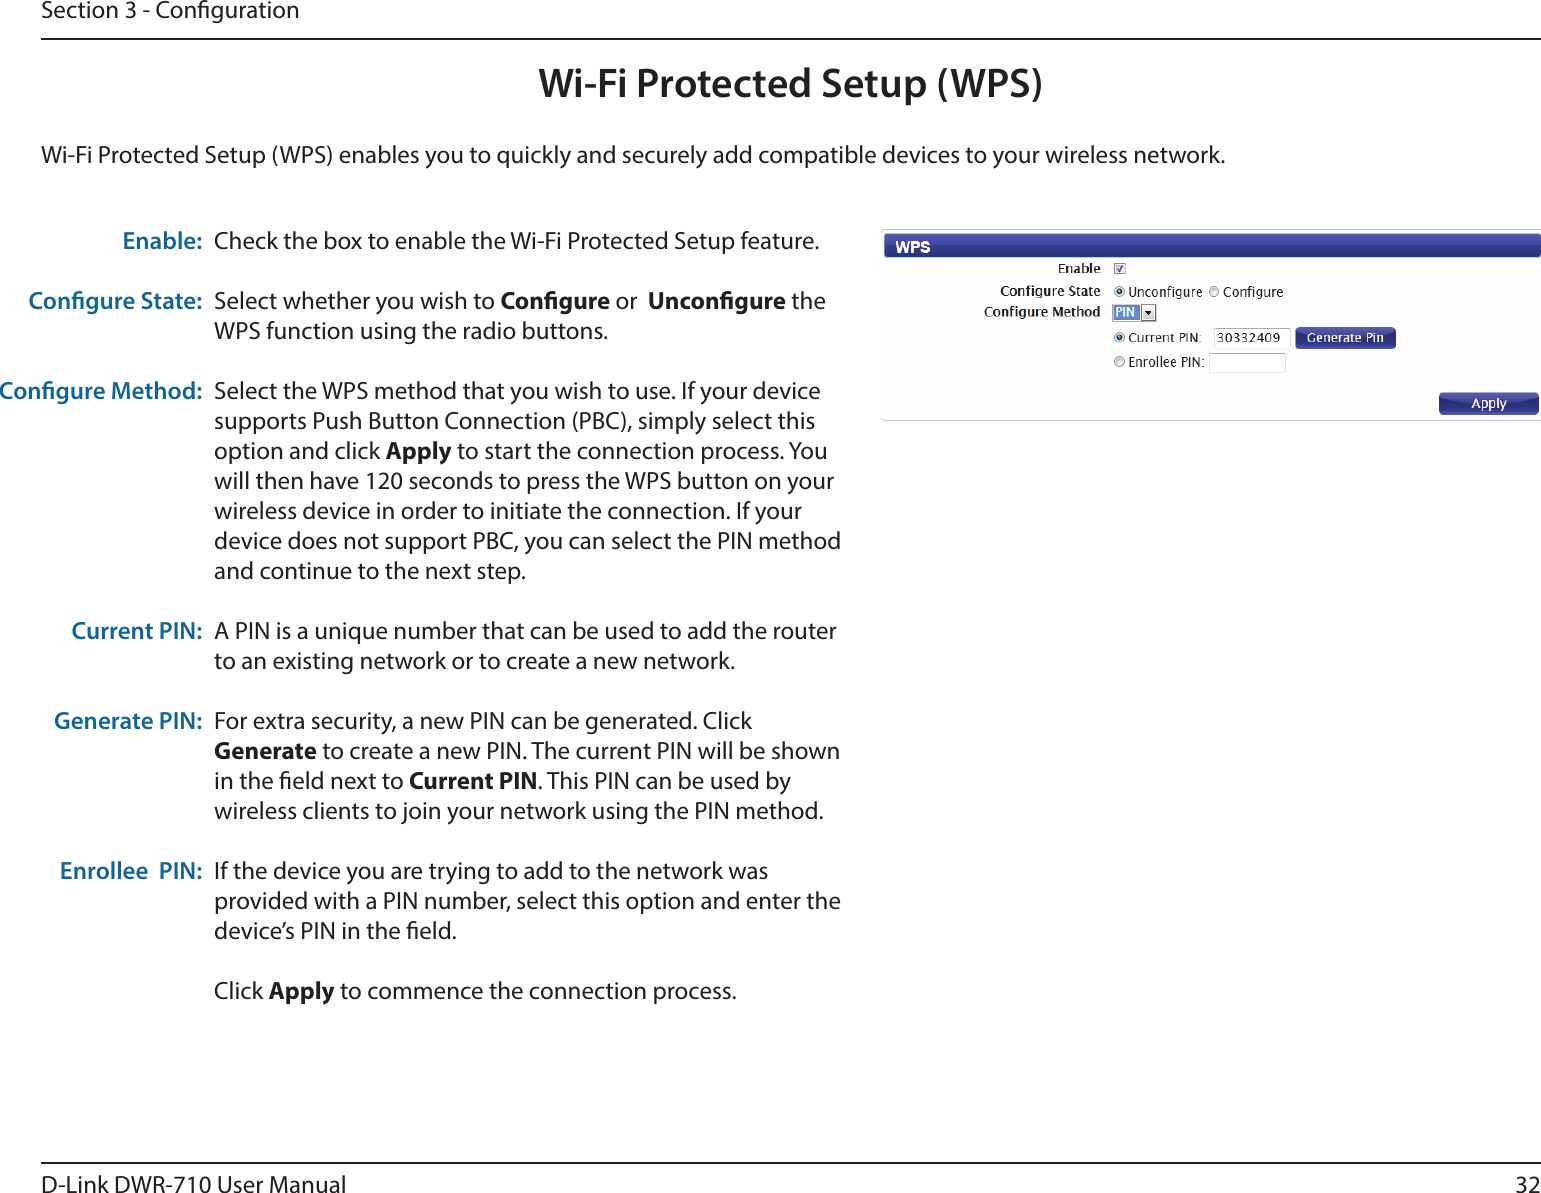 32D-Link DWR-710 User ManualSection 3 - CongurationWi-Fi Protected Setup (WPS)Check the box to enable the Wi-Fi Protected Setup feature.Select whether you wish to Congure or  Uncongure the WPS function using the radio buttons.Select the WPS method that you wish to use. If your device supports Push Button Connection (PBC), simply select this option and click Apply to start the connection process. You will then have 120 seconds to press the WPS button on your wireless device in order to initiate the connection. If your device does not support PBC, you can select the PIN method and continue to the next step.A PIN is a unique number that can be used to add the router to an existing network or to create a new network. For extra security, a new PIN can be generated. Click Generate to create a new PIN. The current PIN will be shown in the eld next to Current PIN. This PIN can be used by wireless clients to join your network using the PIN method.If the device you are trying to add to the network was provided with a PIN number, select this option and enter the device’s PIN in the eld. Click Apply to commence the connection process. Enable:Congure State:Congure Method:Current PIN:Generate PIN:Enrollee  PIN:Wi-Fi Protected Setup (WPS) enables you to quickly and securely add compatible devices to your wireless network. 